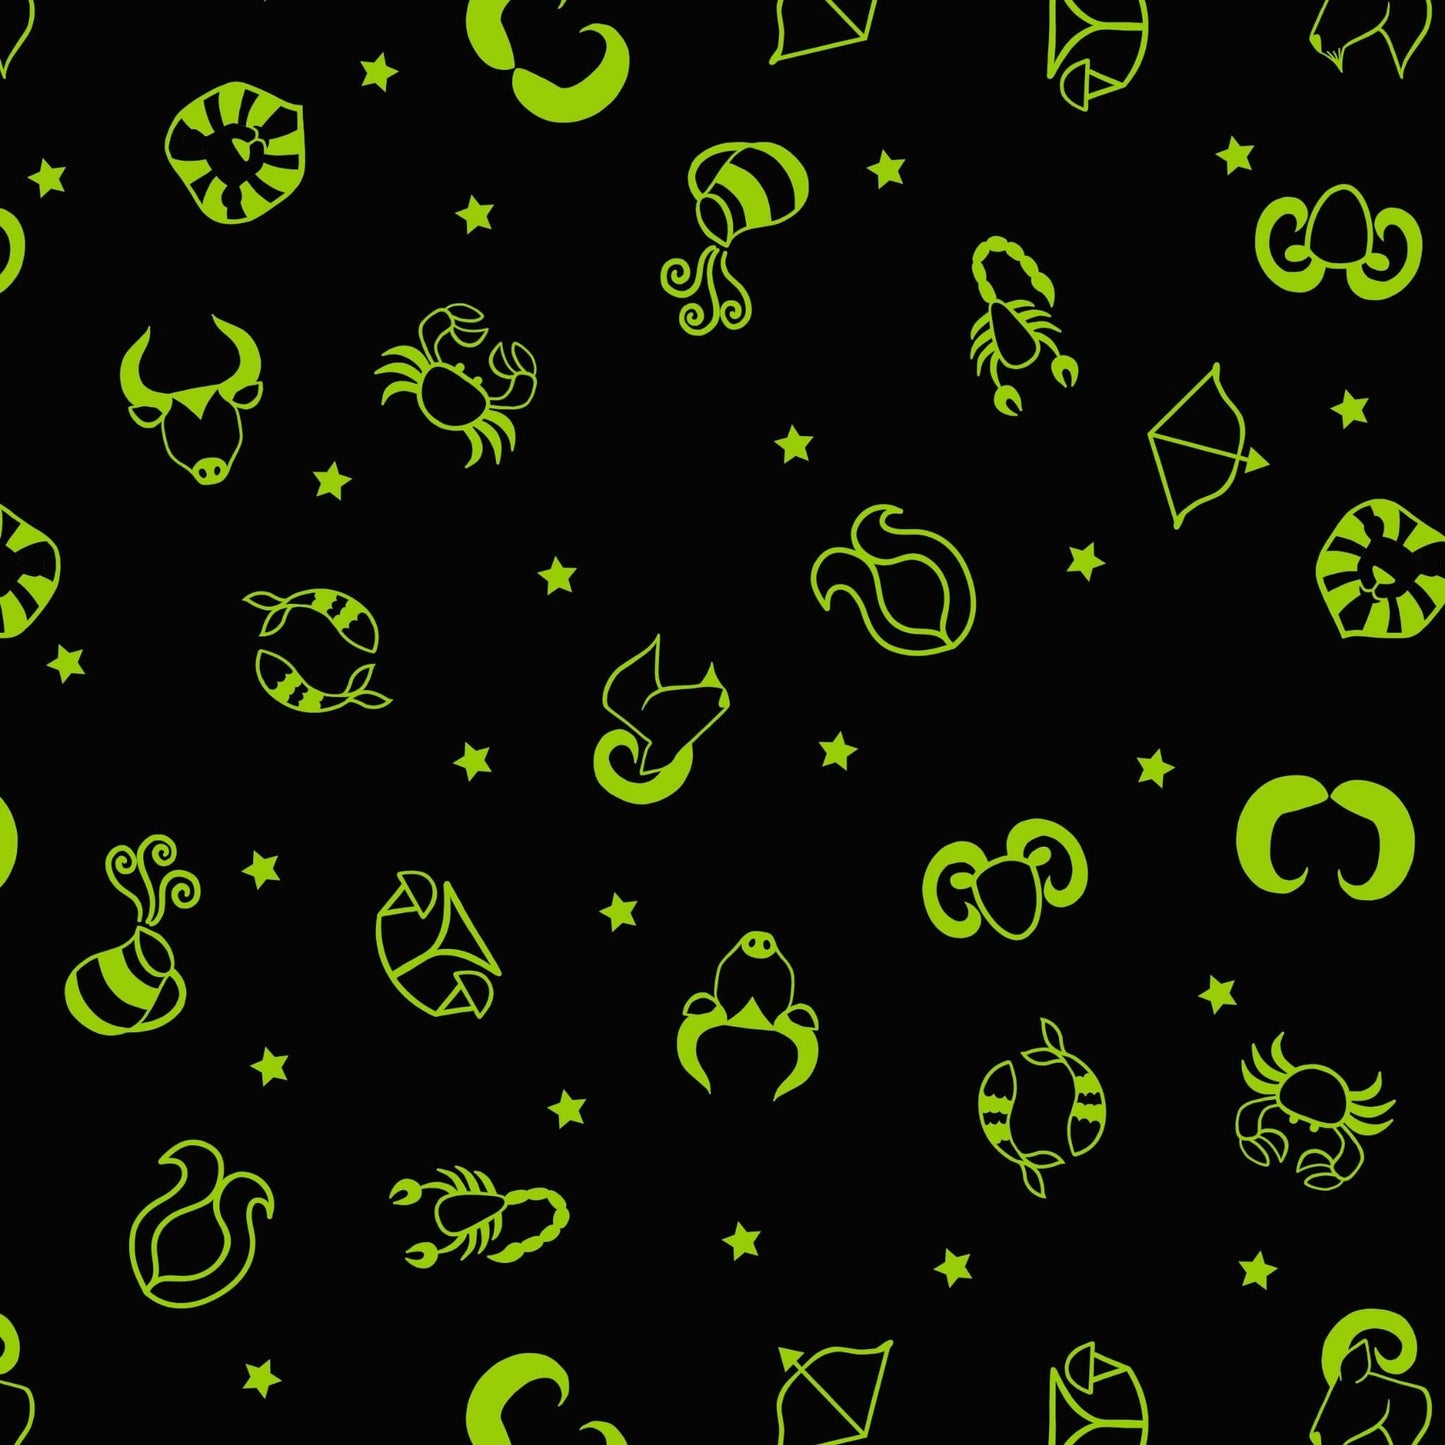 Star Signs - Small Things Glow Fabric Range - Lewis & Irene - Mellow Orche